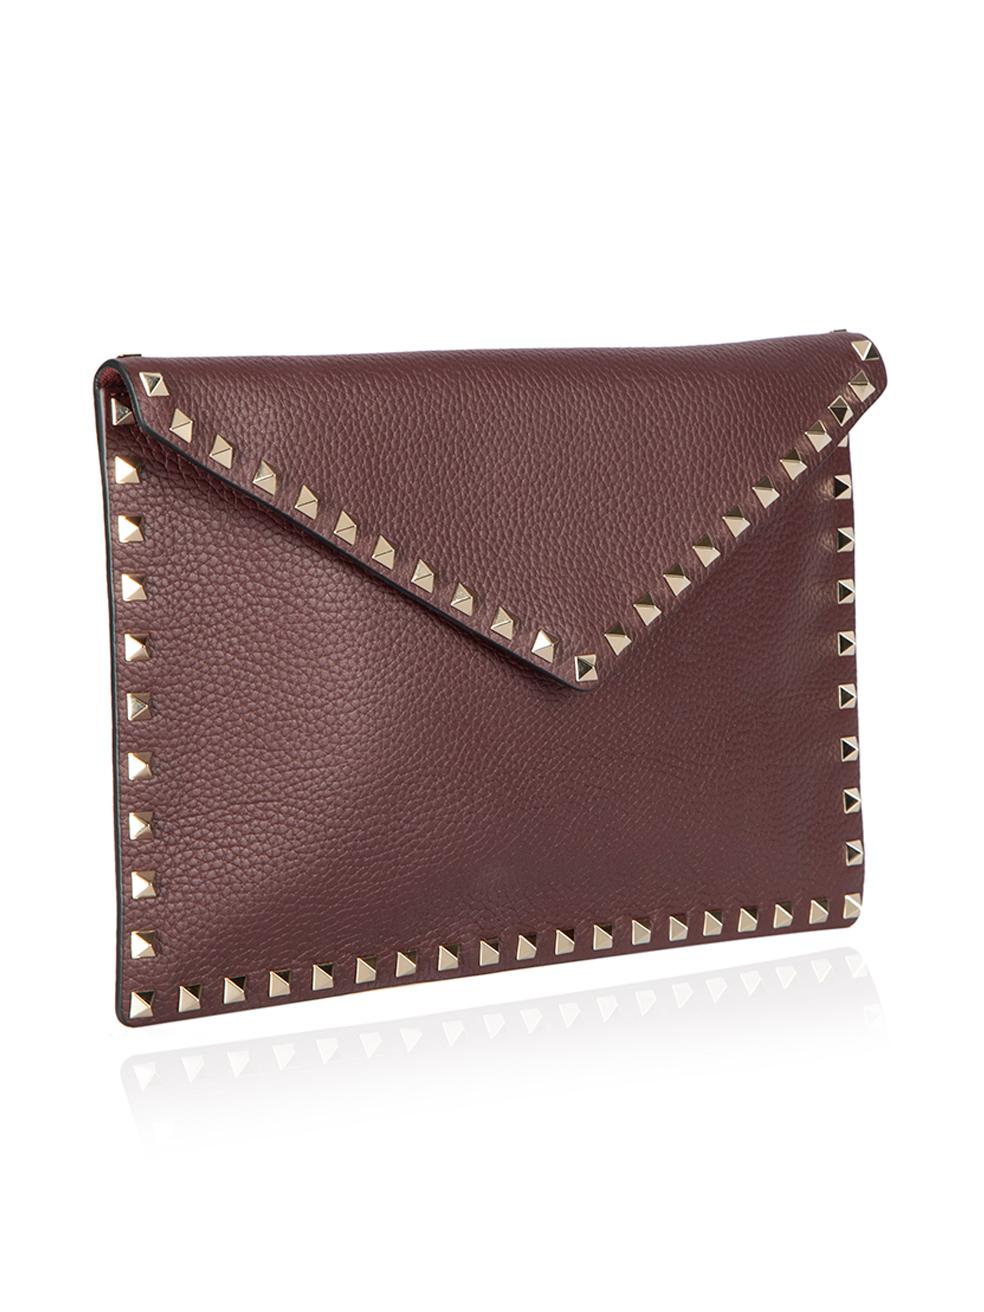 CONDITION is Never Worn. No visible wear to clutch is evident on this used Valentino designer resale item. This bag comes with original dust bag.



Details


Burgundy 

Leather

Medium envelope clutch bag

Silver stud detail

Magnetic fastening

1x